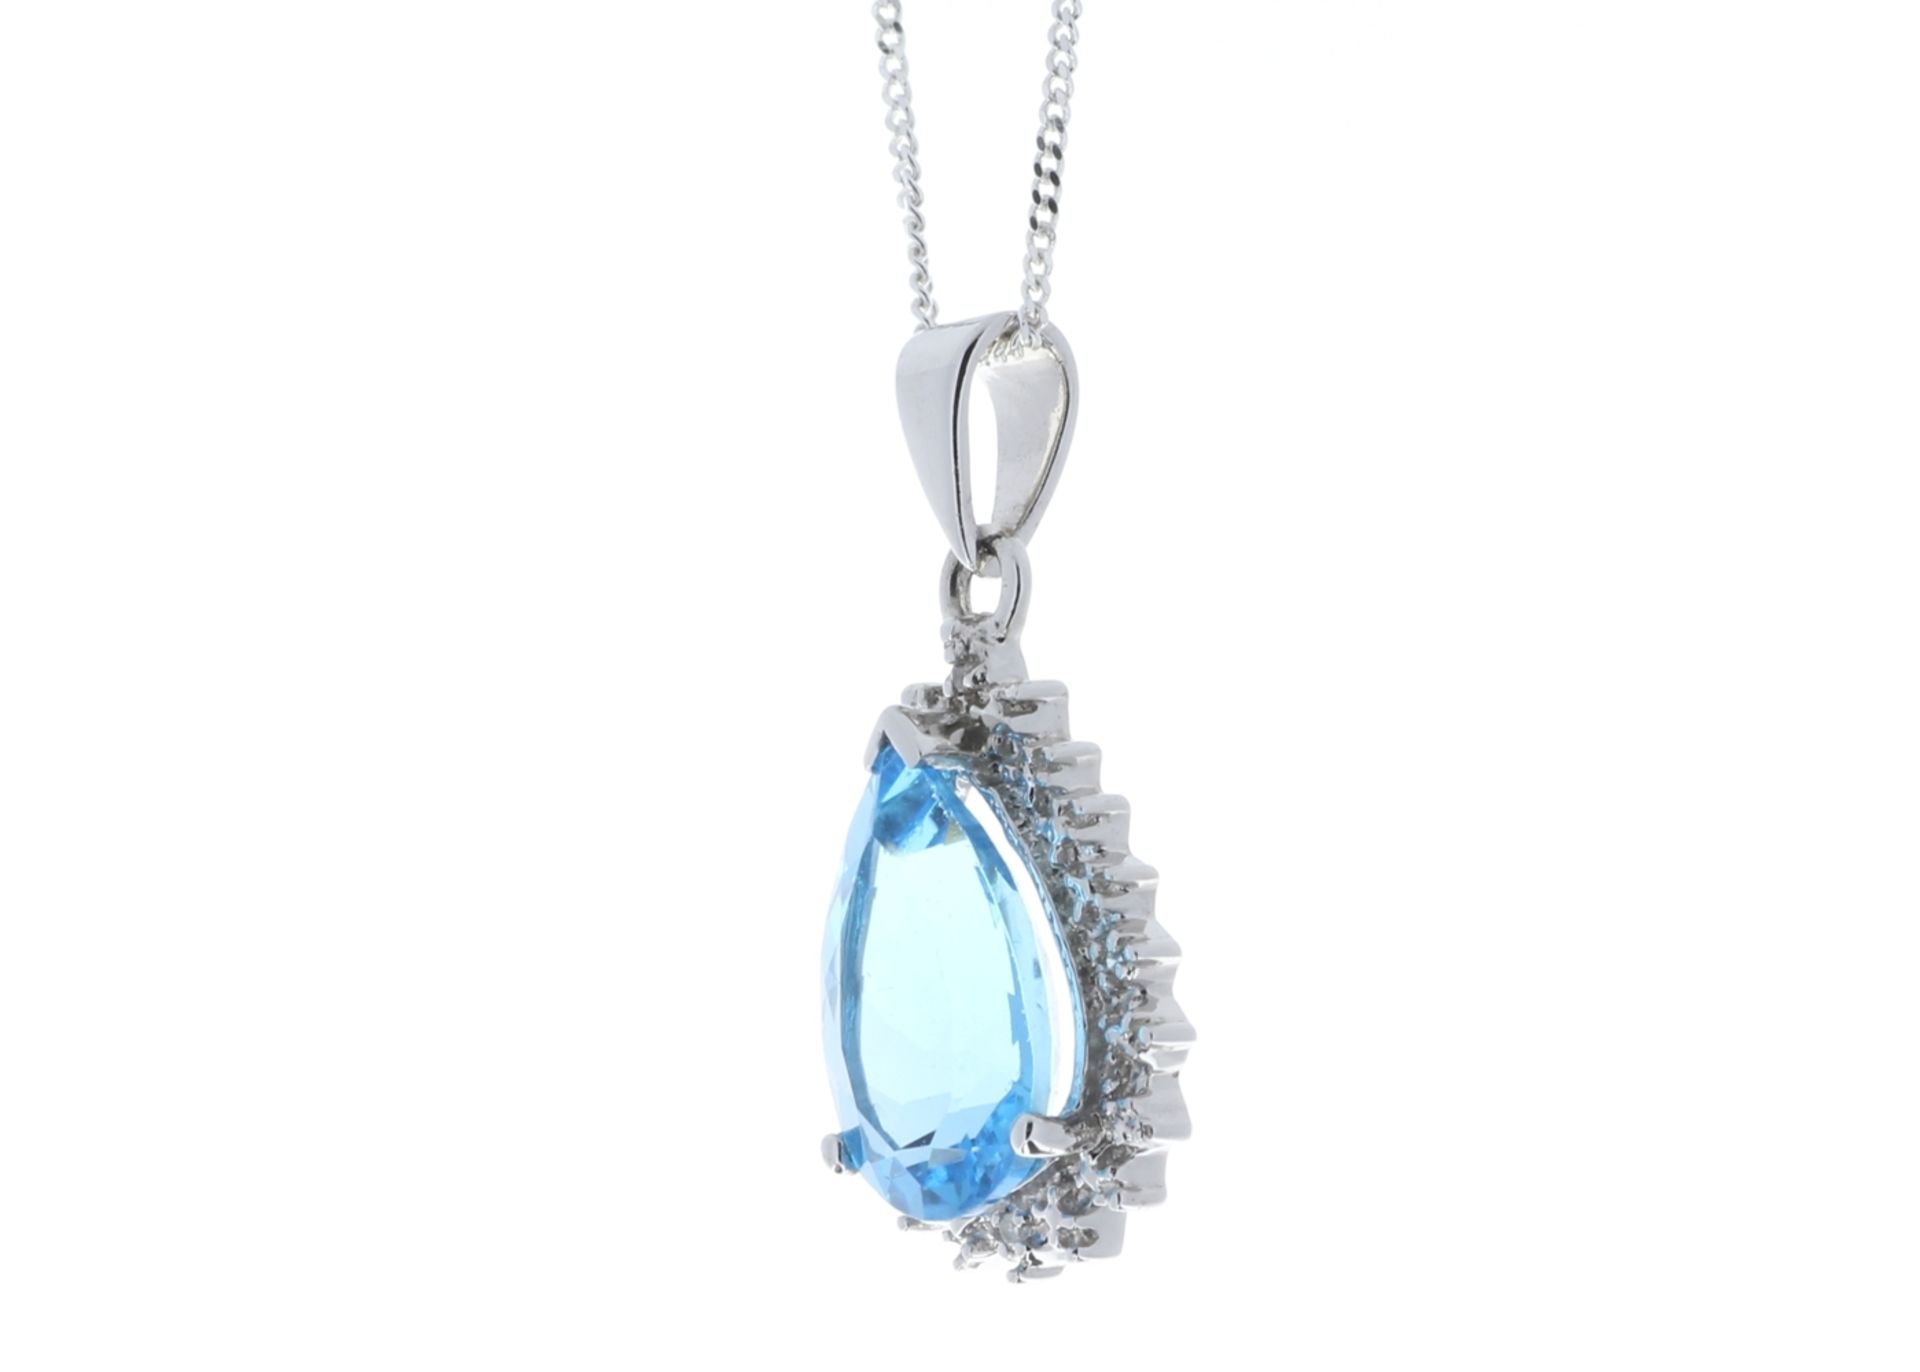 9ct White Gold Diamond And Blue Topaz Pendant 0.01 Carats - Valued by GIE £1,220.00 - 9ct White Gold - Image 4 of 6